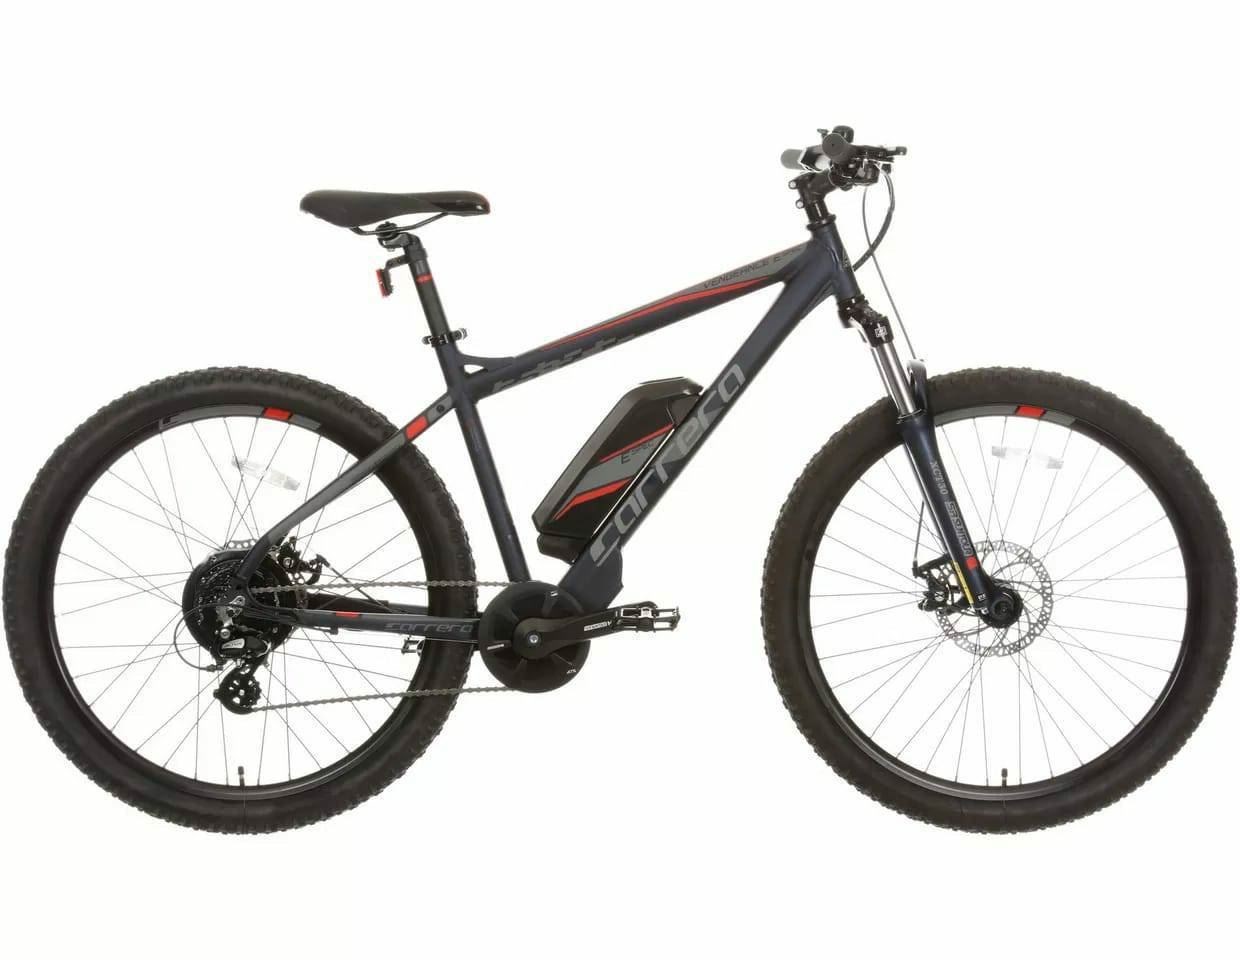 A picture of the e-bike that was stolen from Halfords in Elgin.